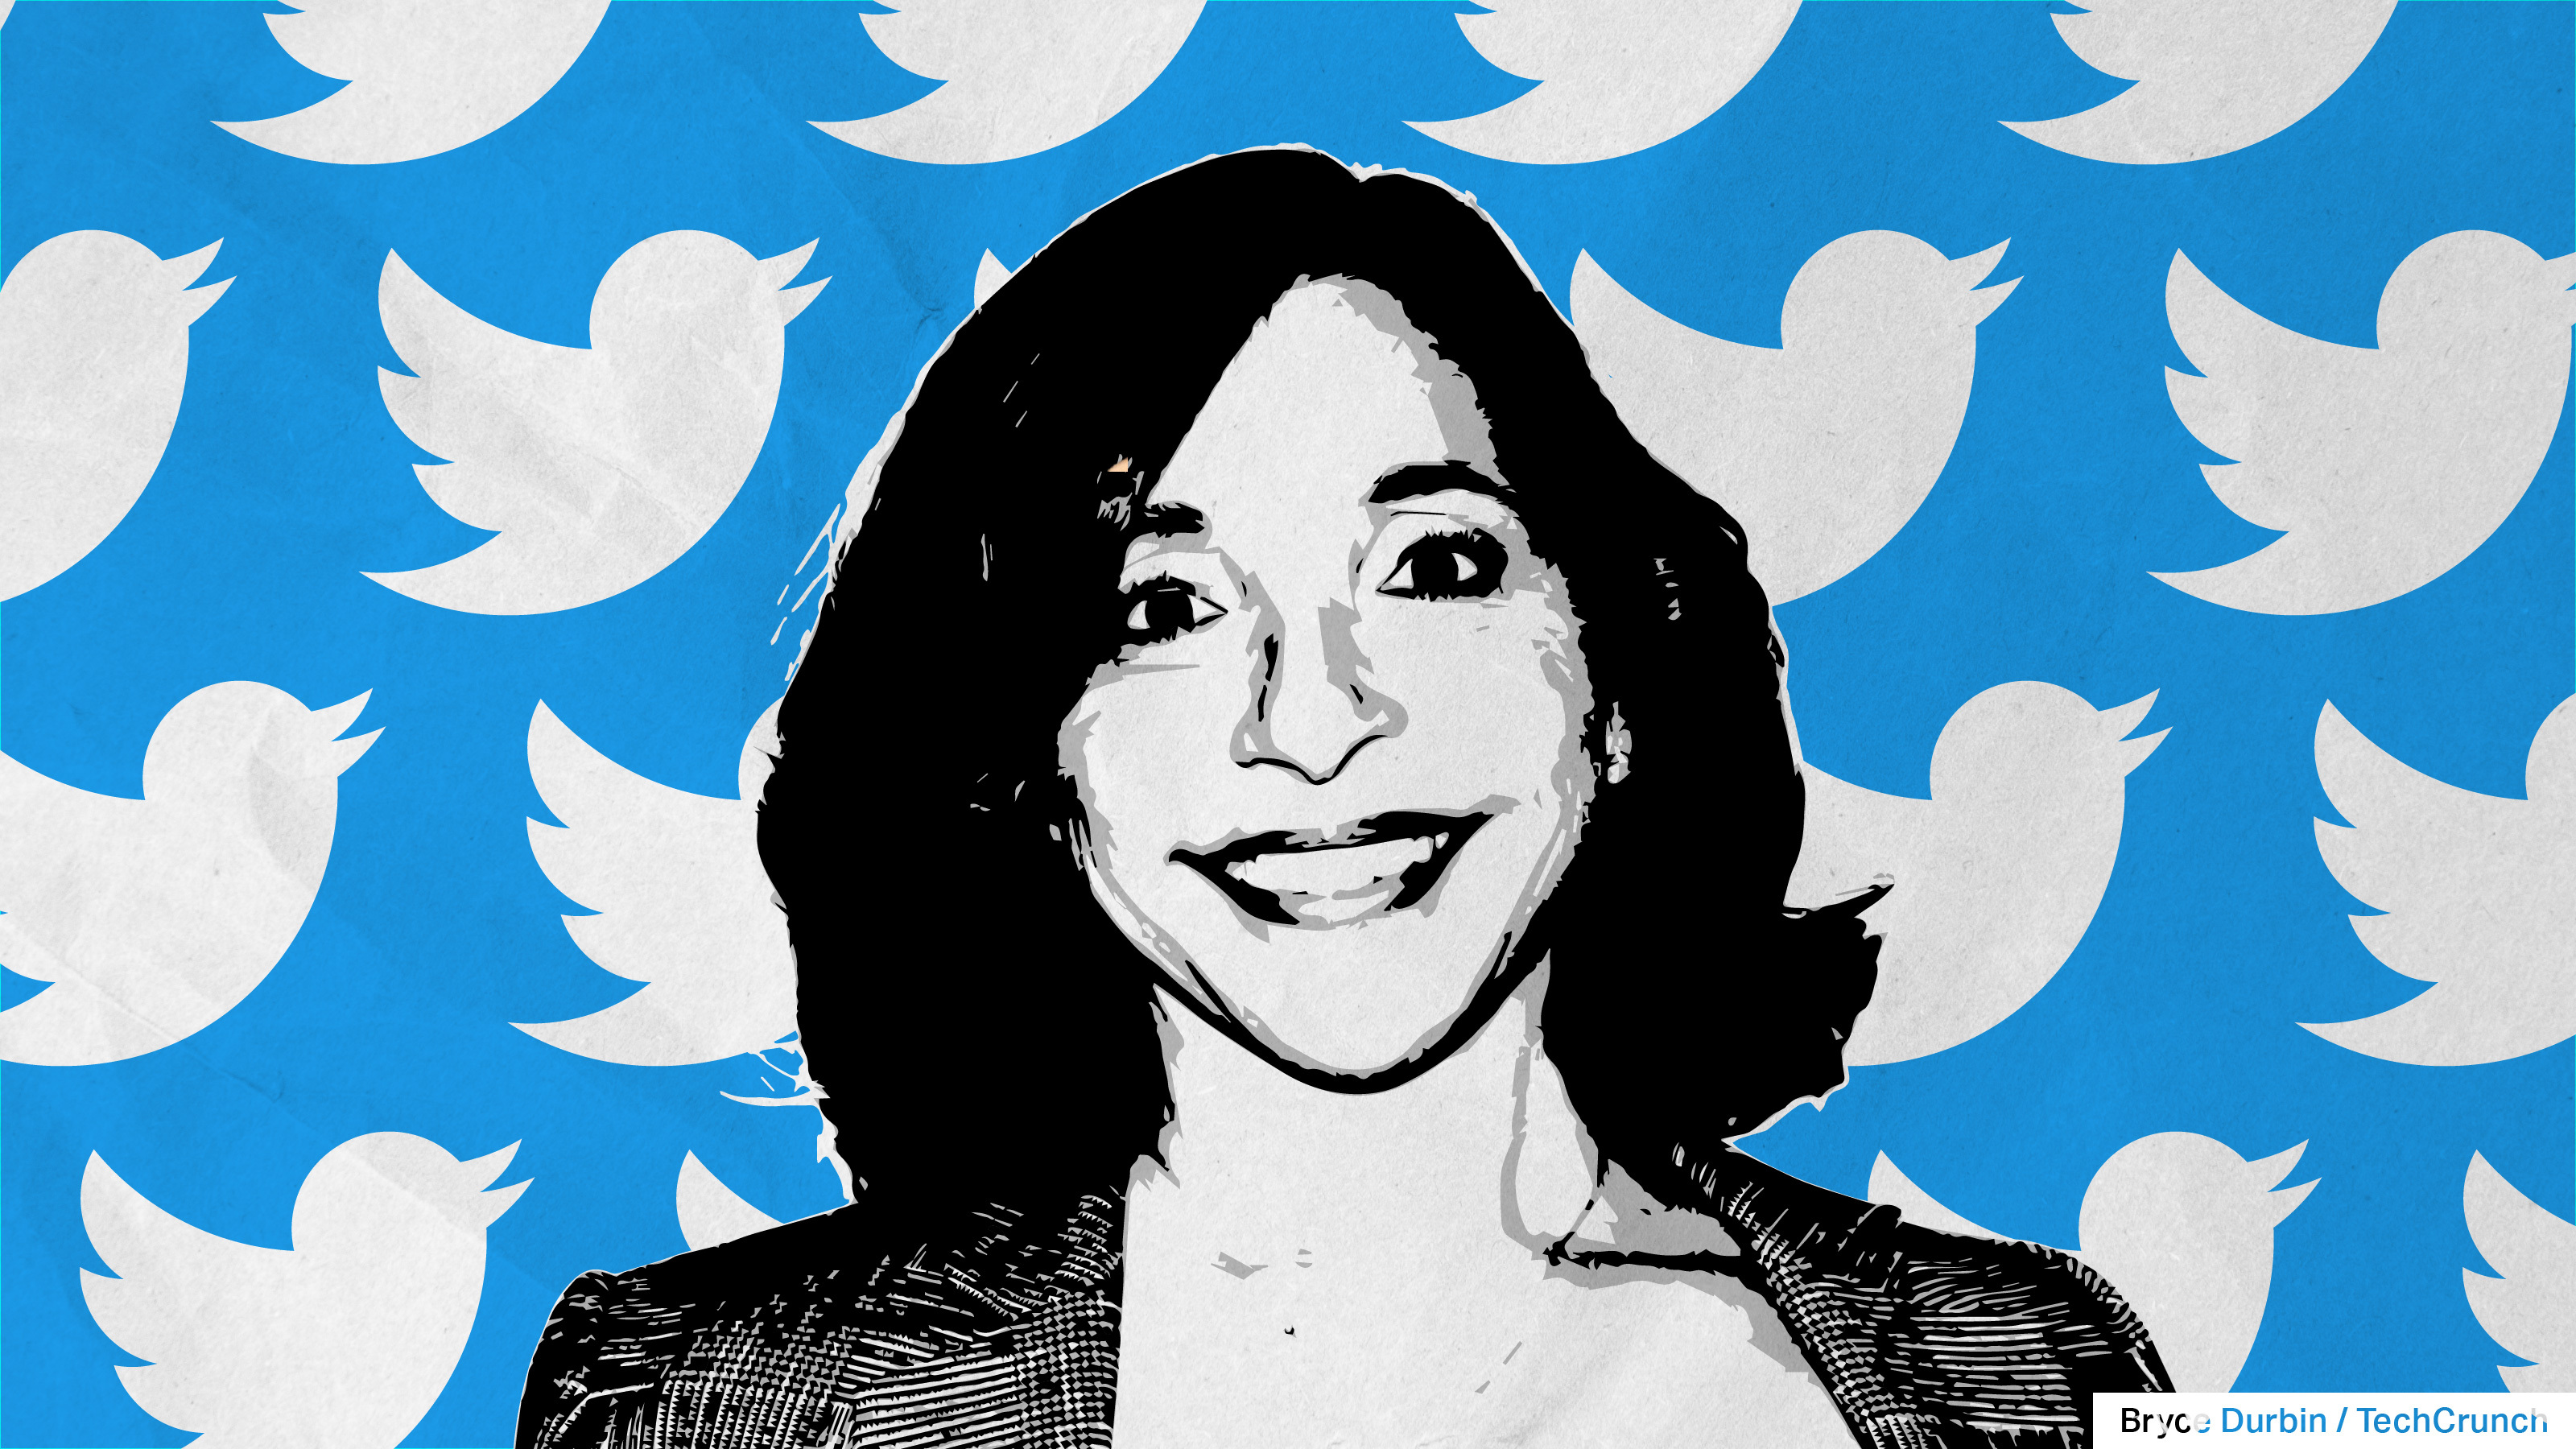 Image of Linda Yaccarino with Twitter birds in the background, representing the new Twitter CEO